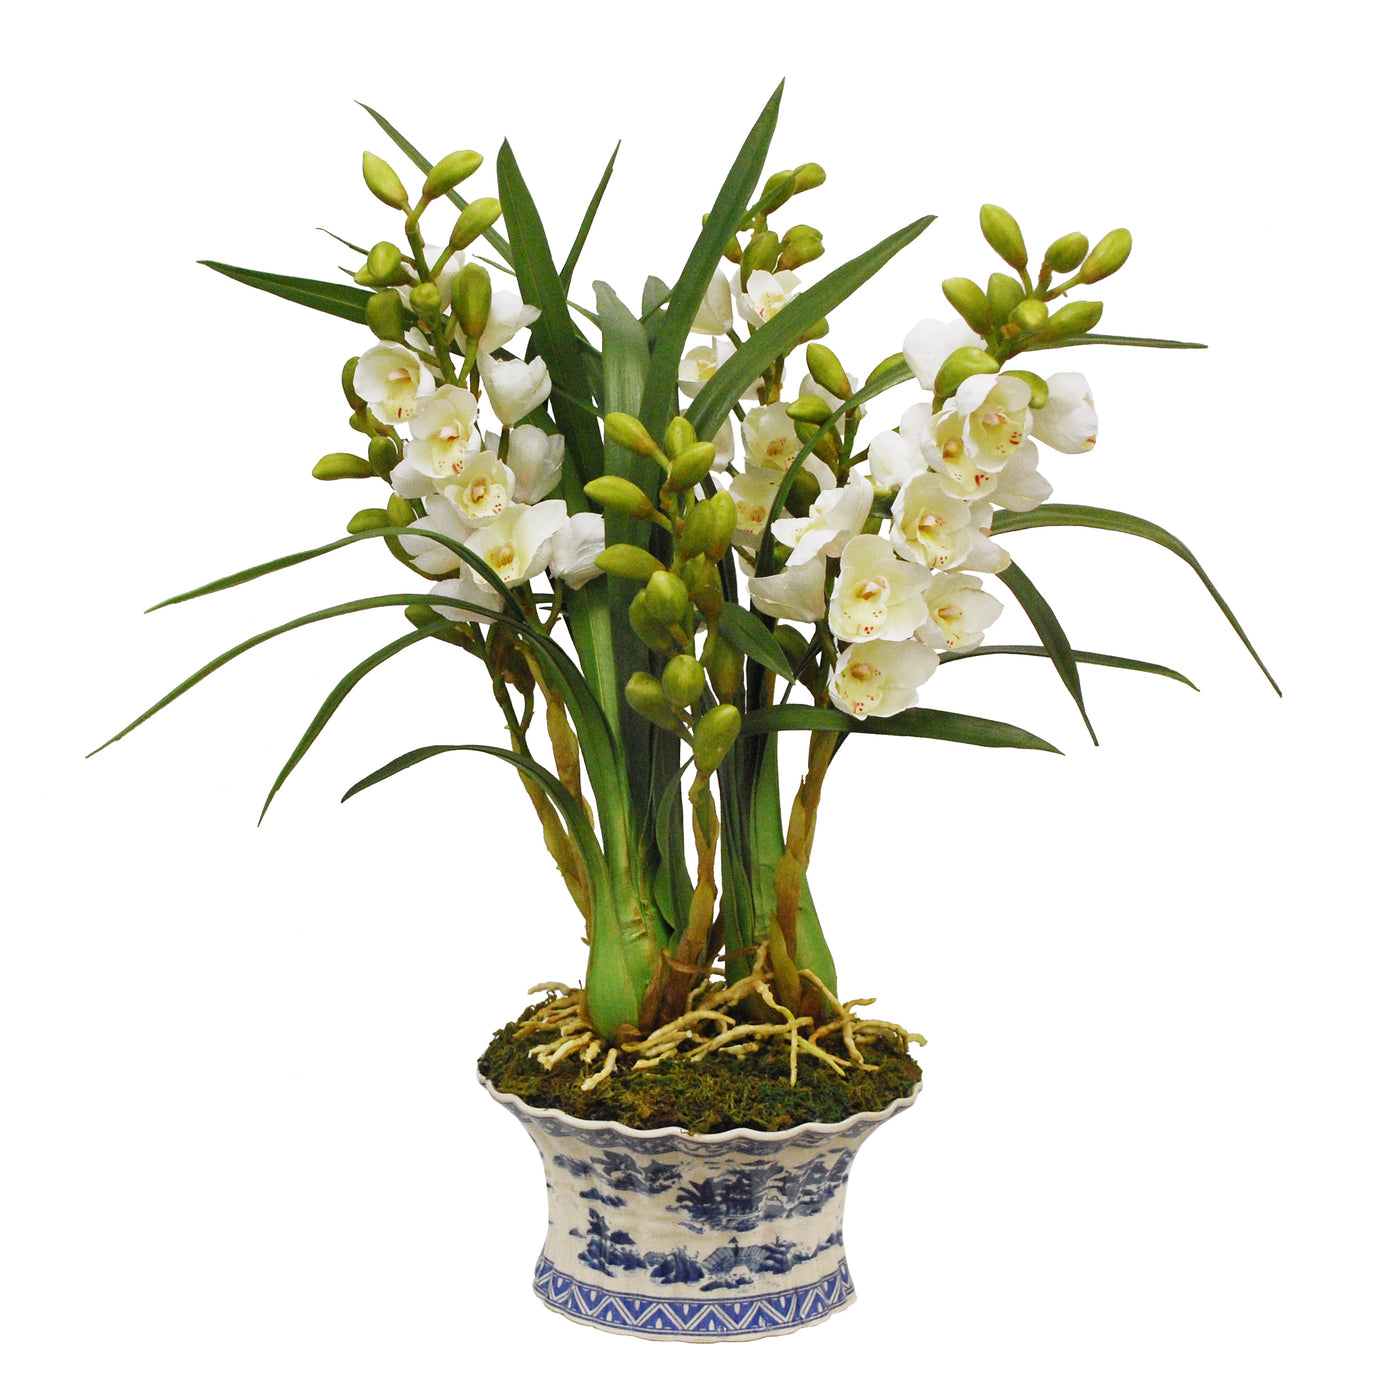 Artificial orchid plant in white and blue ceramic pot